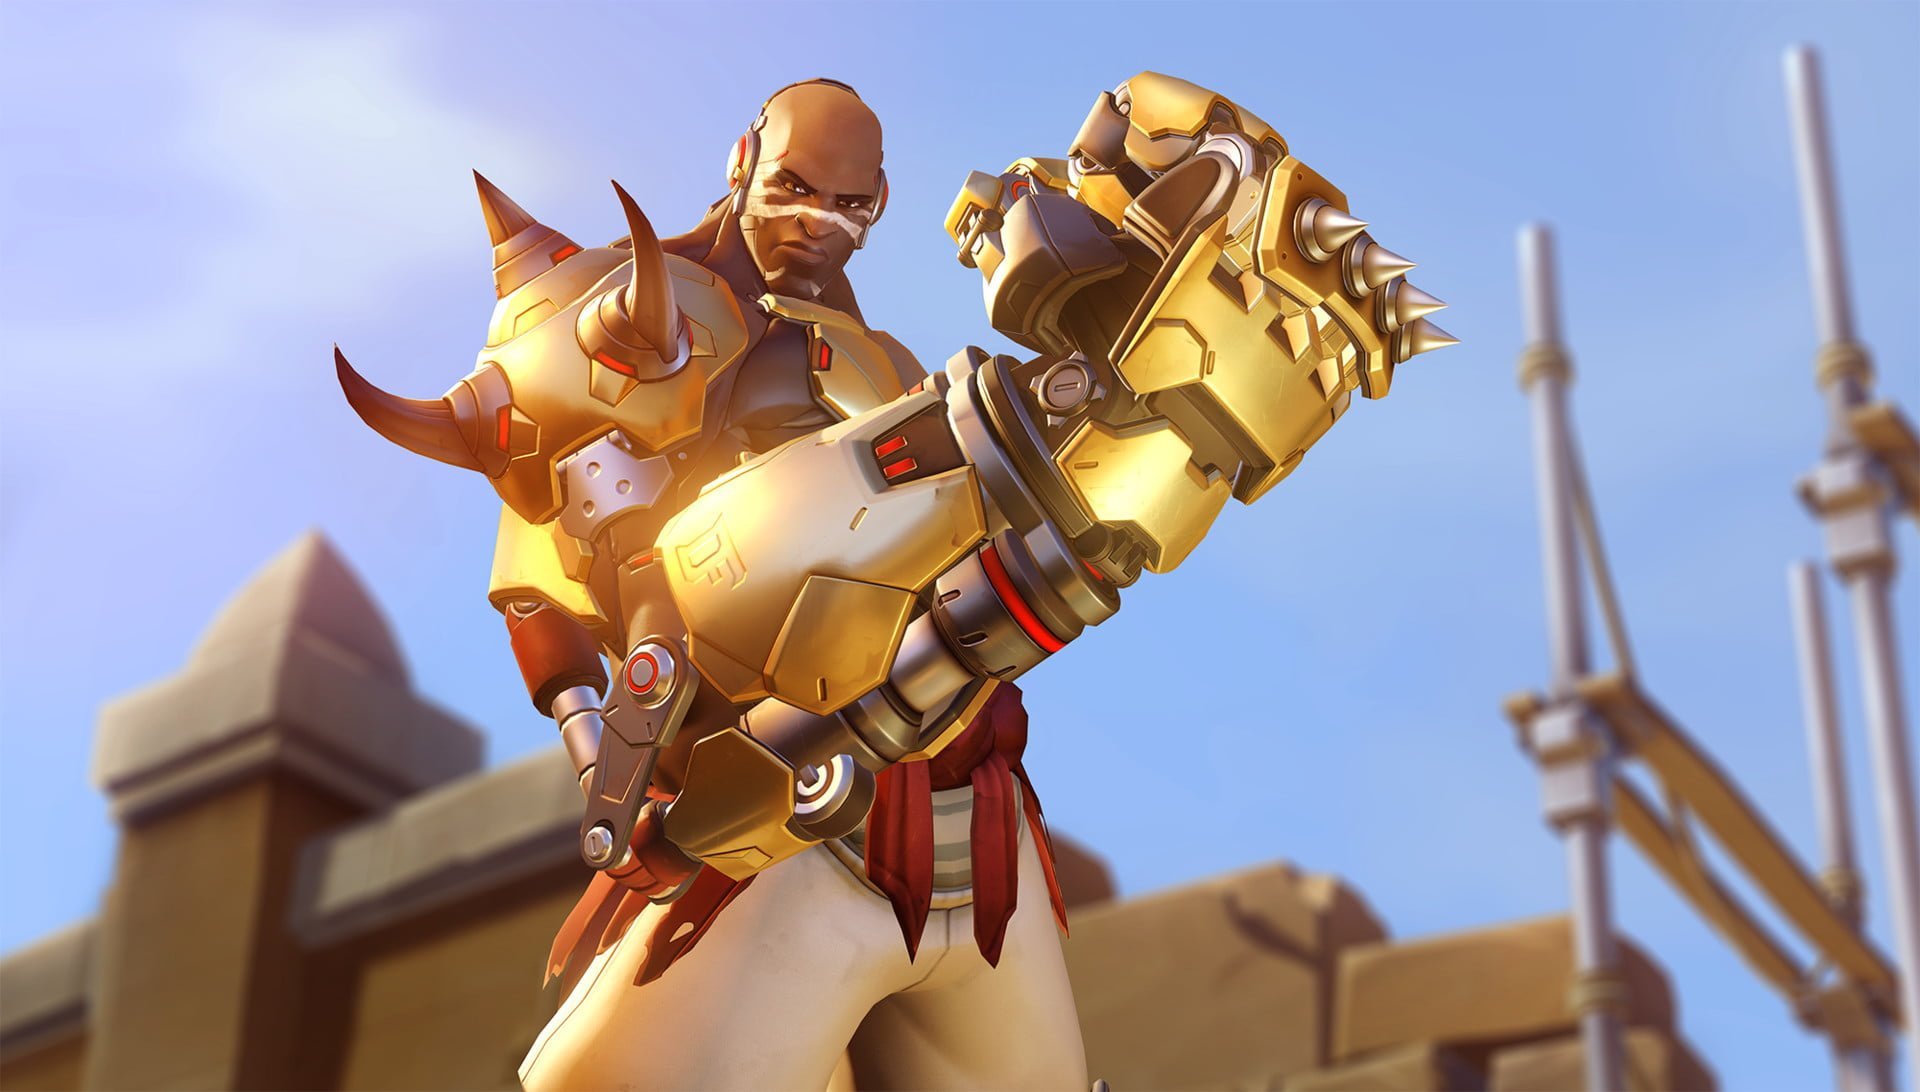 Overwatch Dev Team Readying Fixes for Doomfist